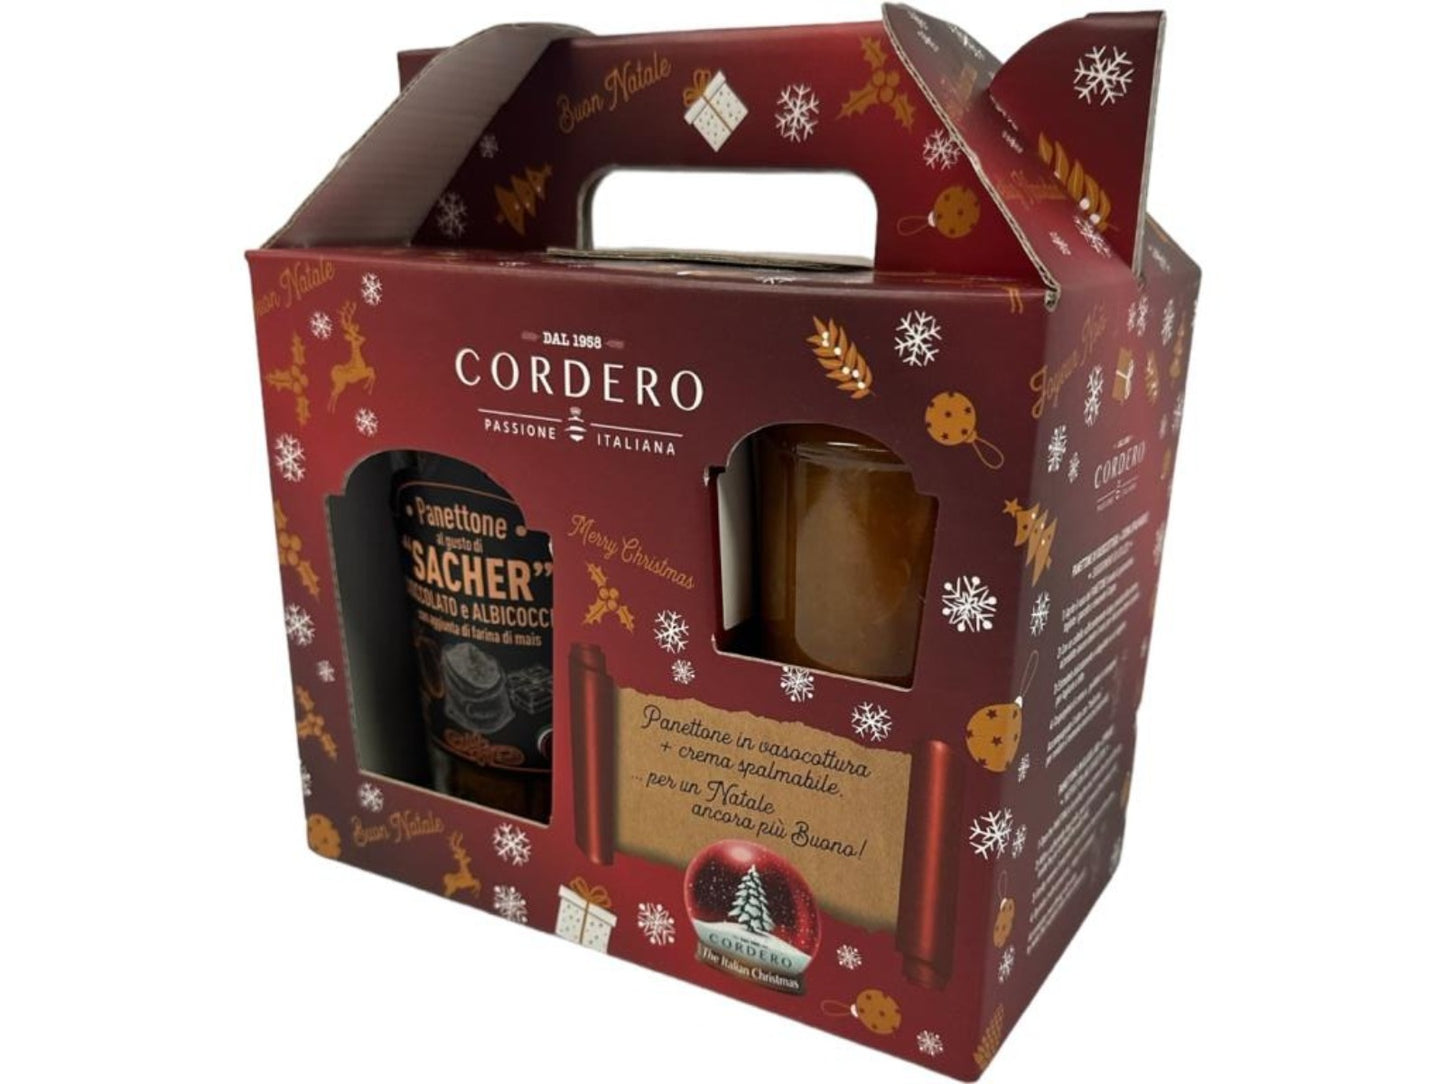 Cordero Panettone Italian Chocolate and Apricots Cake (200g) with Apricot Jam (210g)